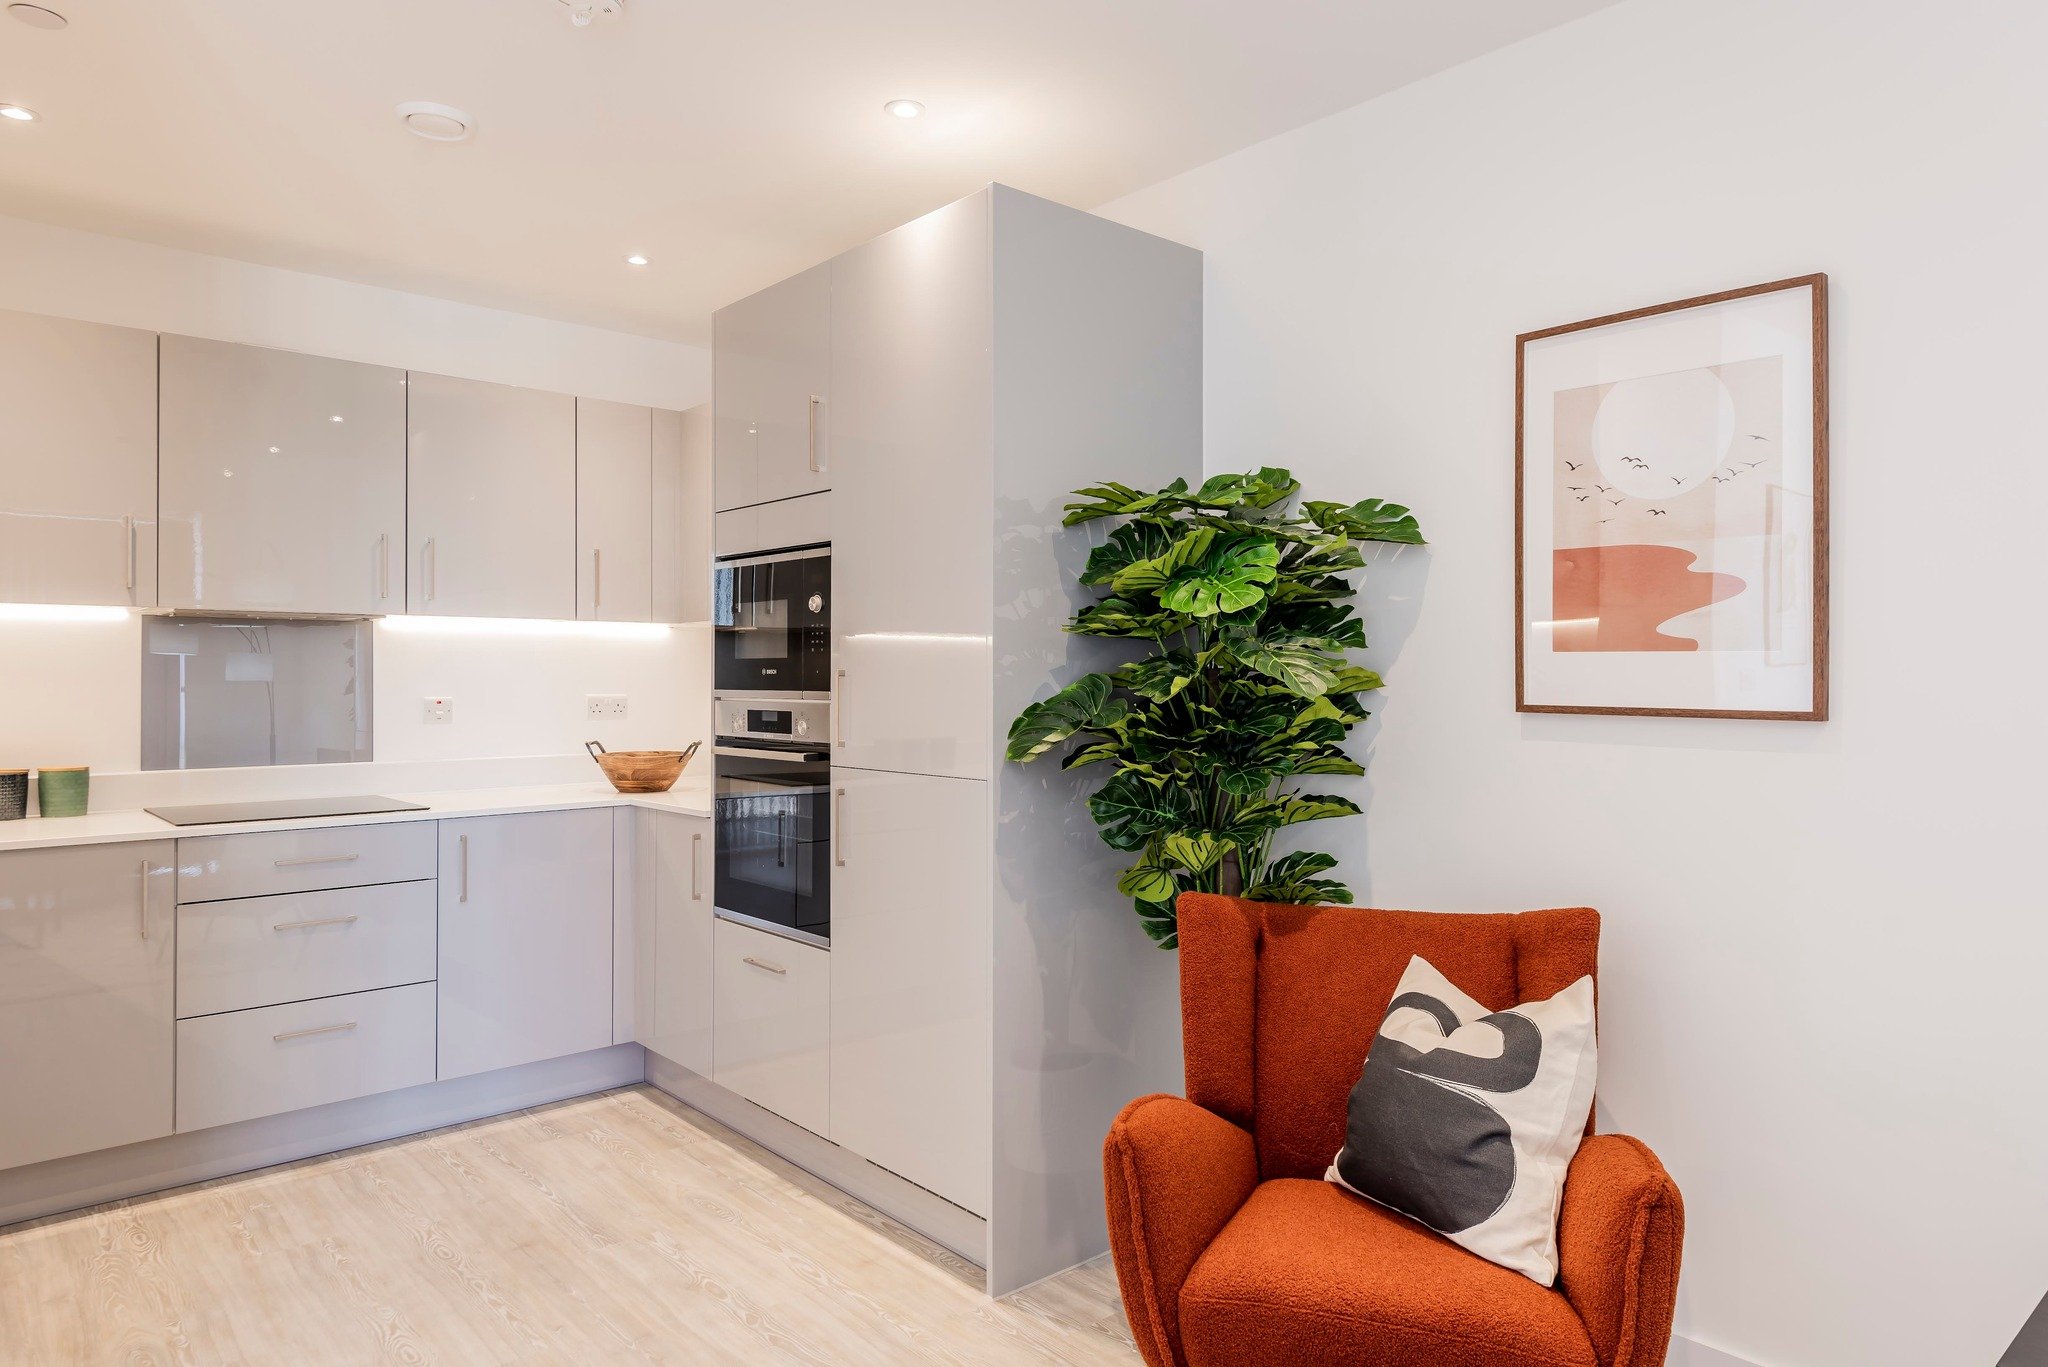 One of the best and most rewarding parts of staging is working with clients to see how we can best utilise the space to make it super practical. This might involve completely reconfiguring a room or investing in multi-functional furniture🛋️

#interi